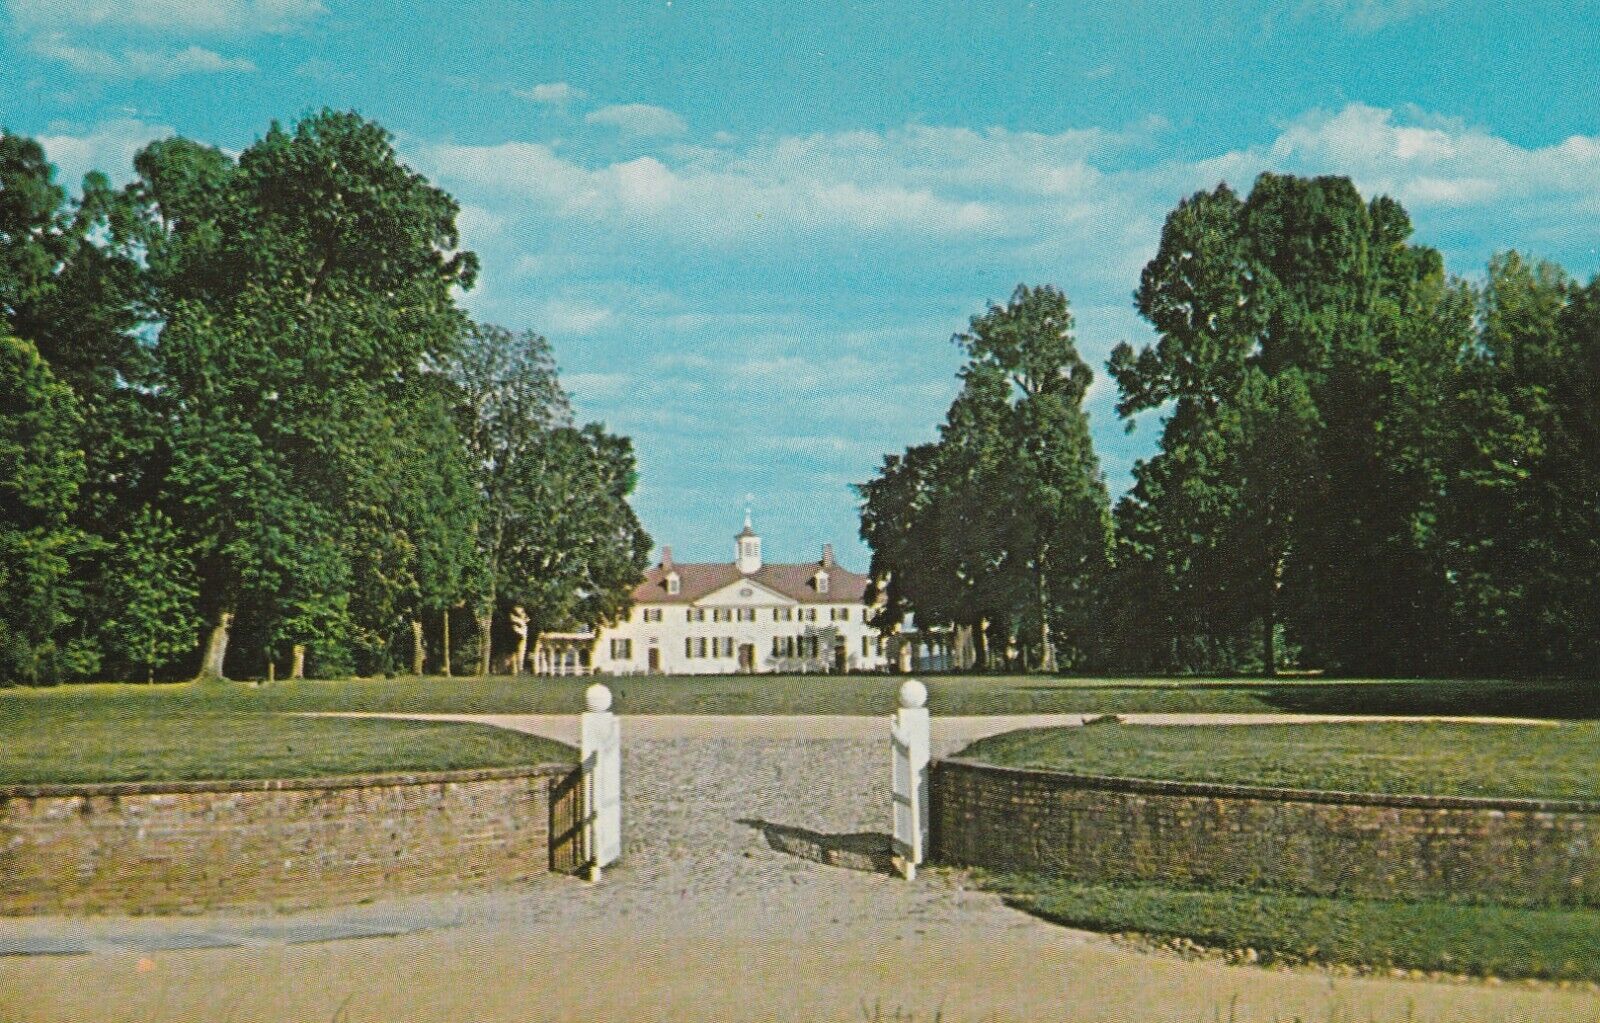 The West front of the Mount Vernon seen from Bowling Green Gate postcard 